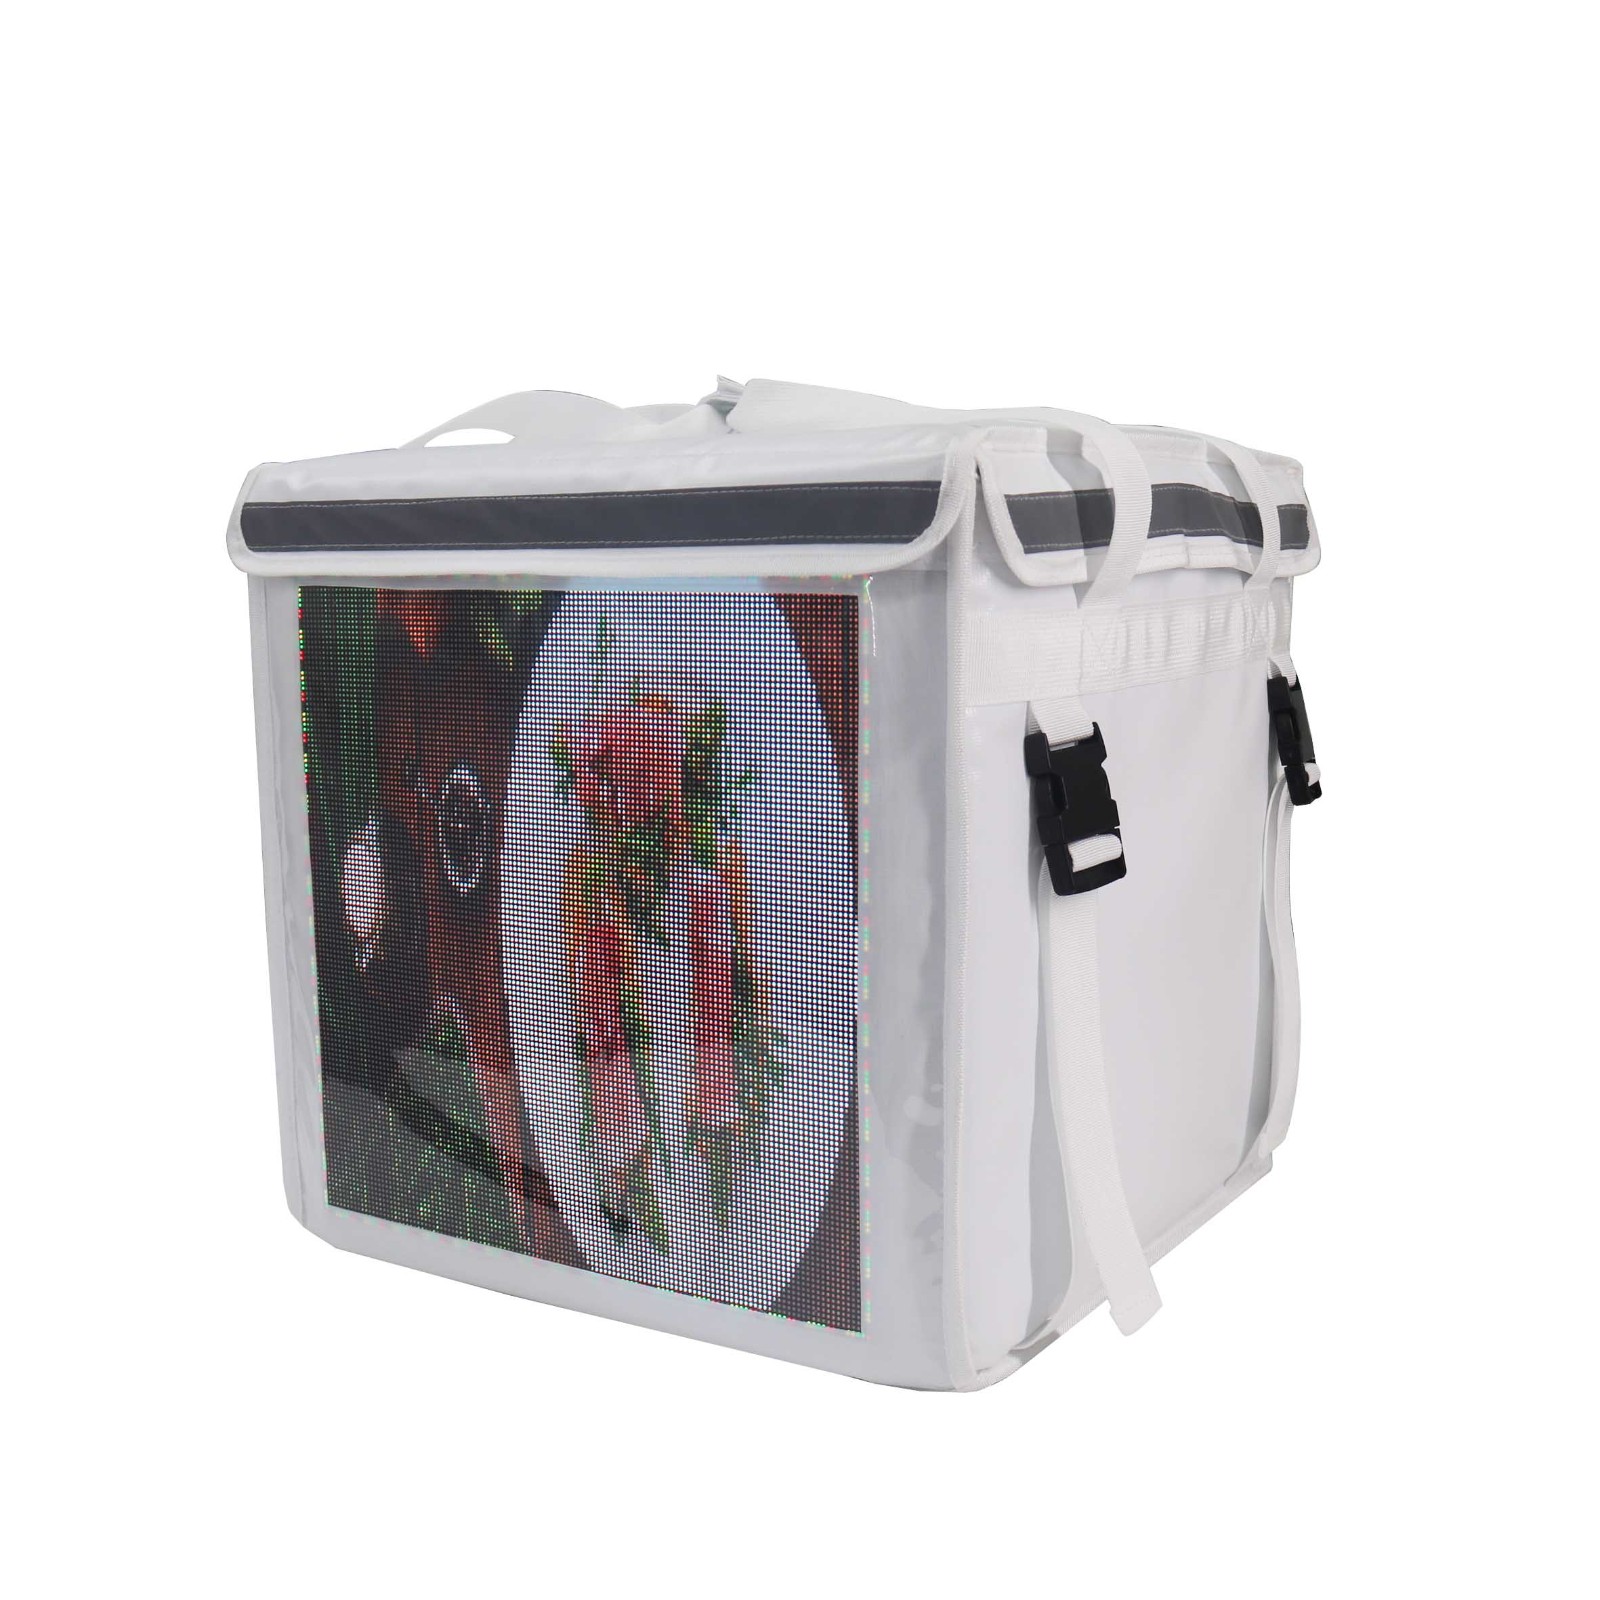 LED Dispaly Professional Thermal Delivery Backpack Bag for Large Food Deliveries